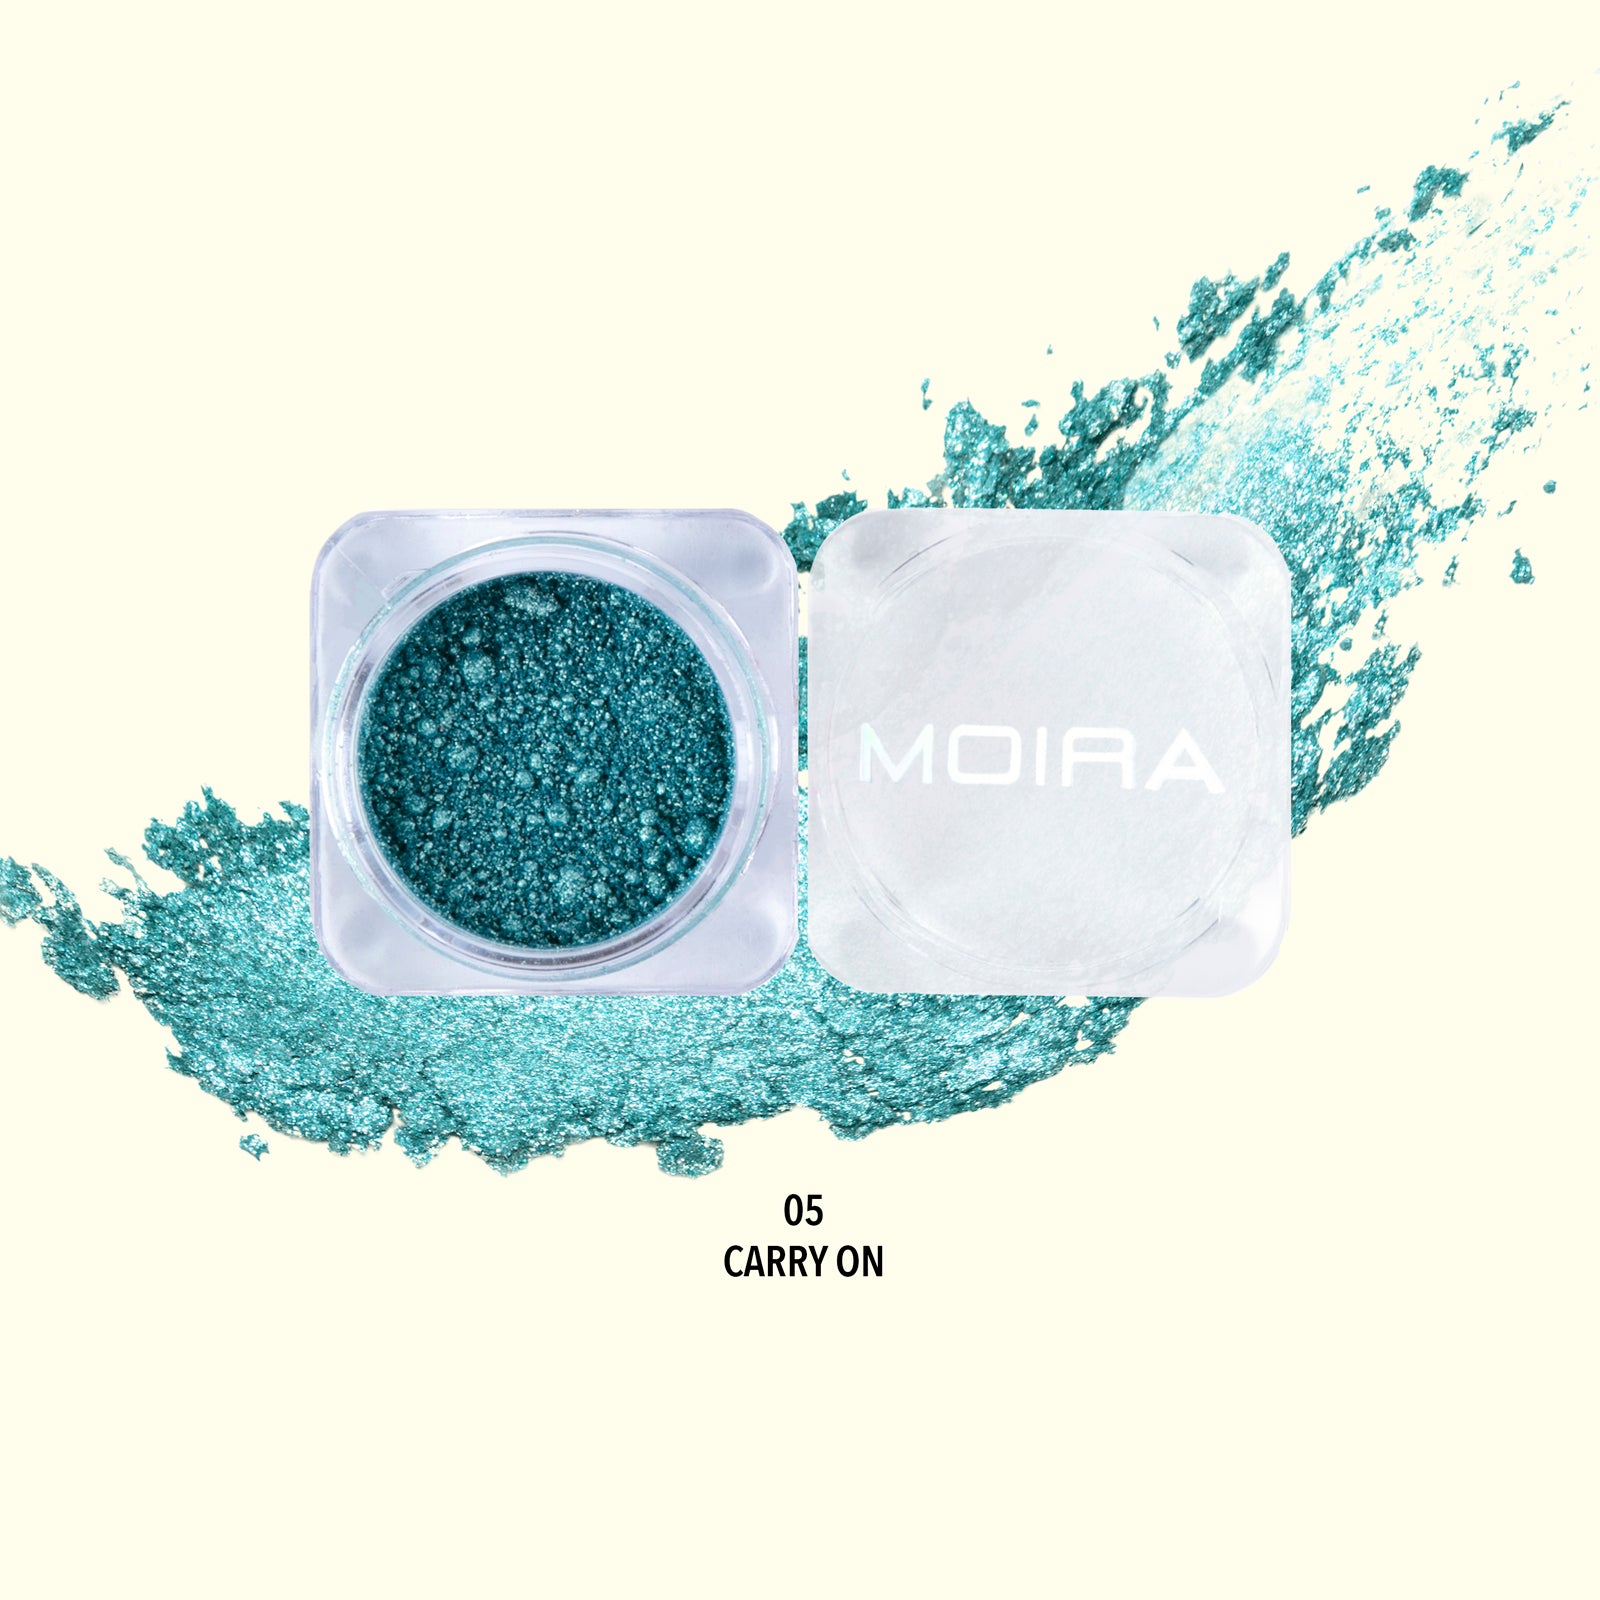 Loose Control Pigment (005, Carry On)